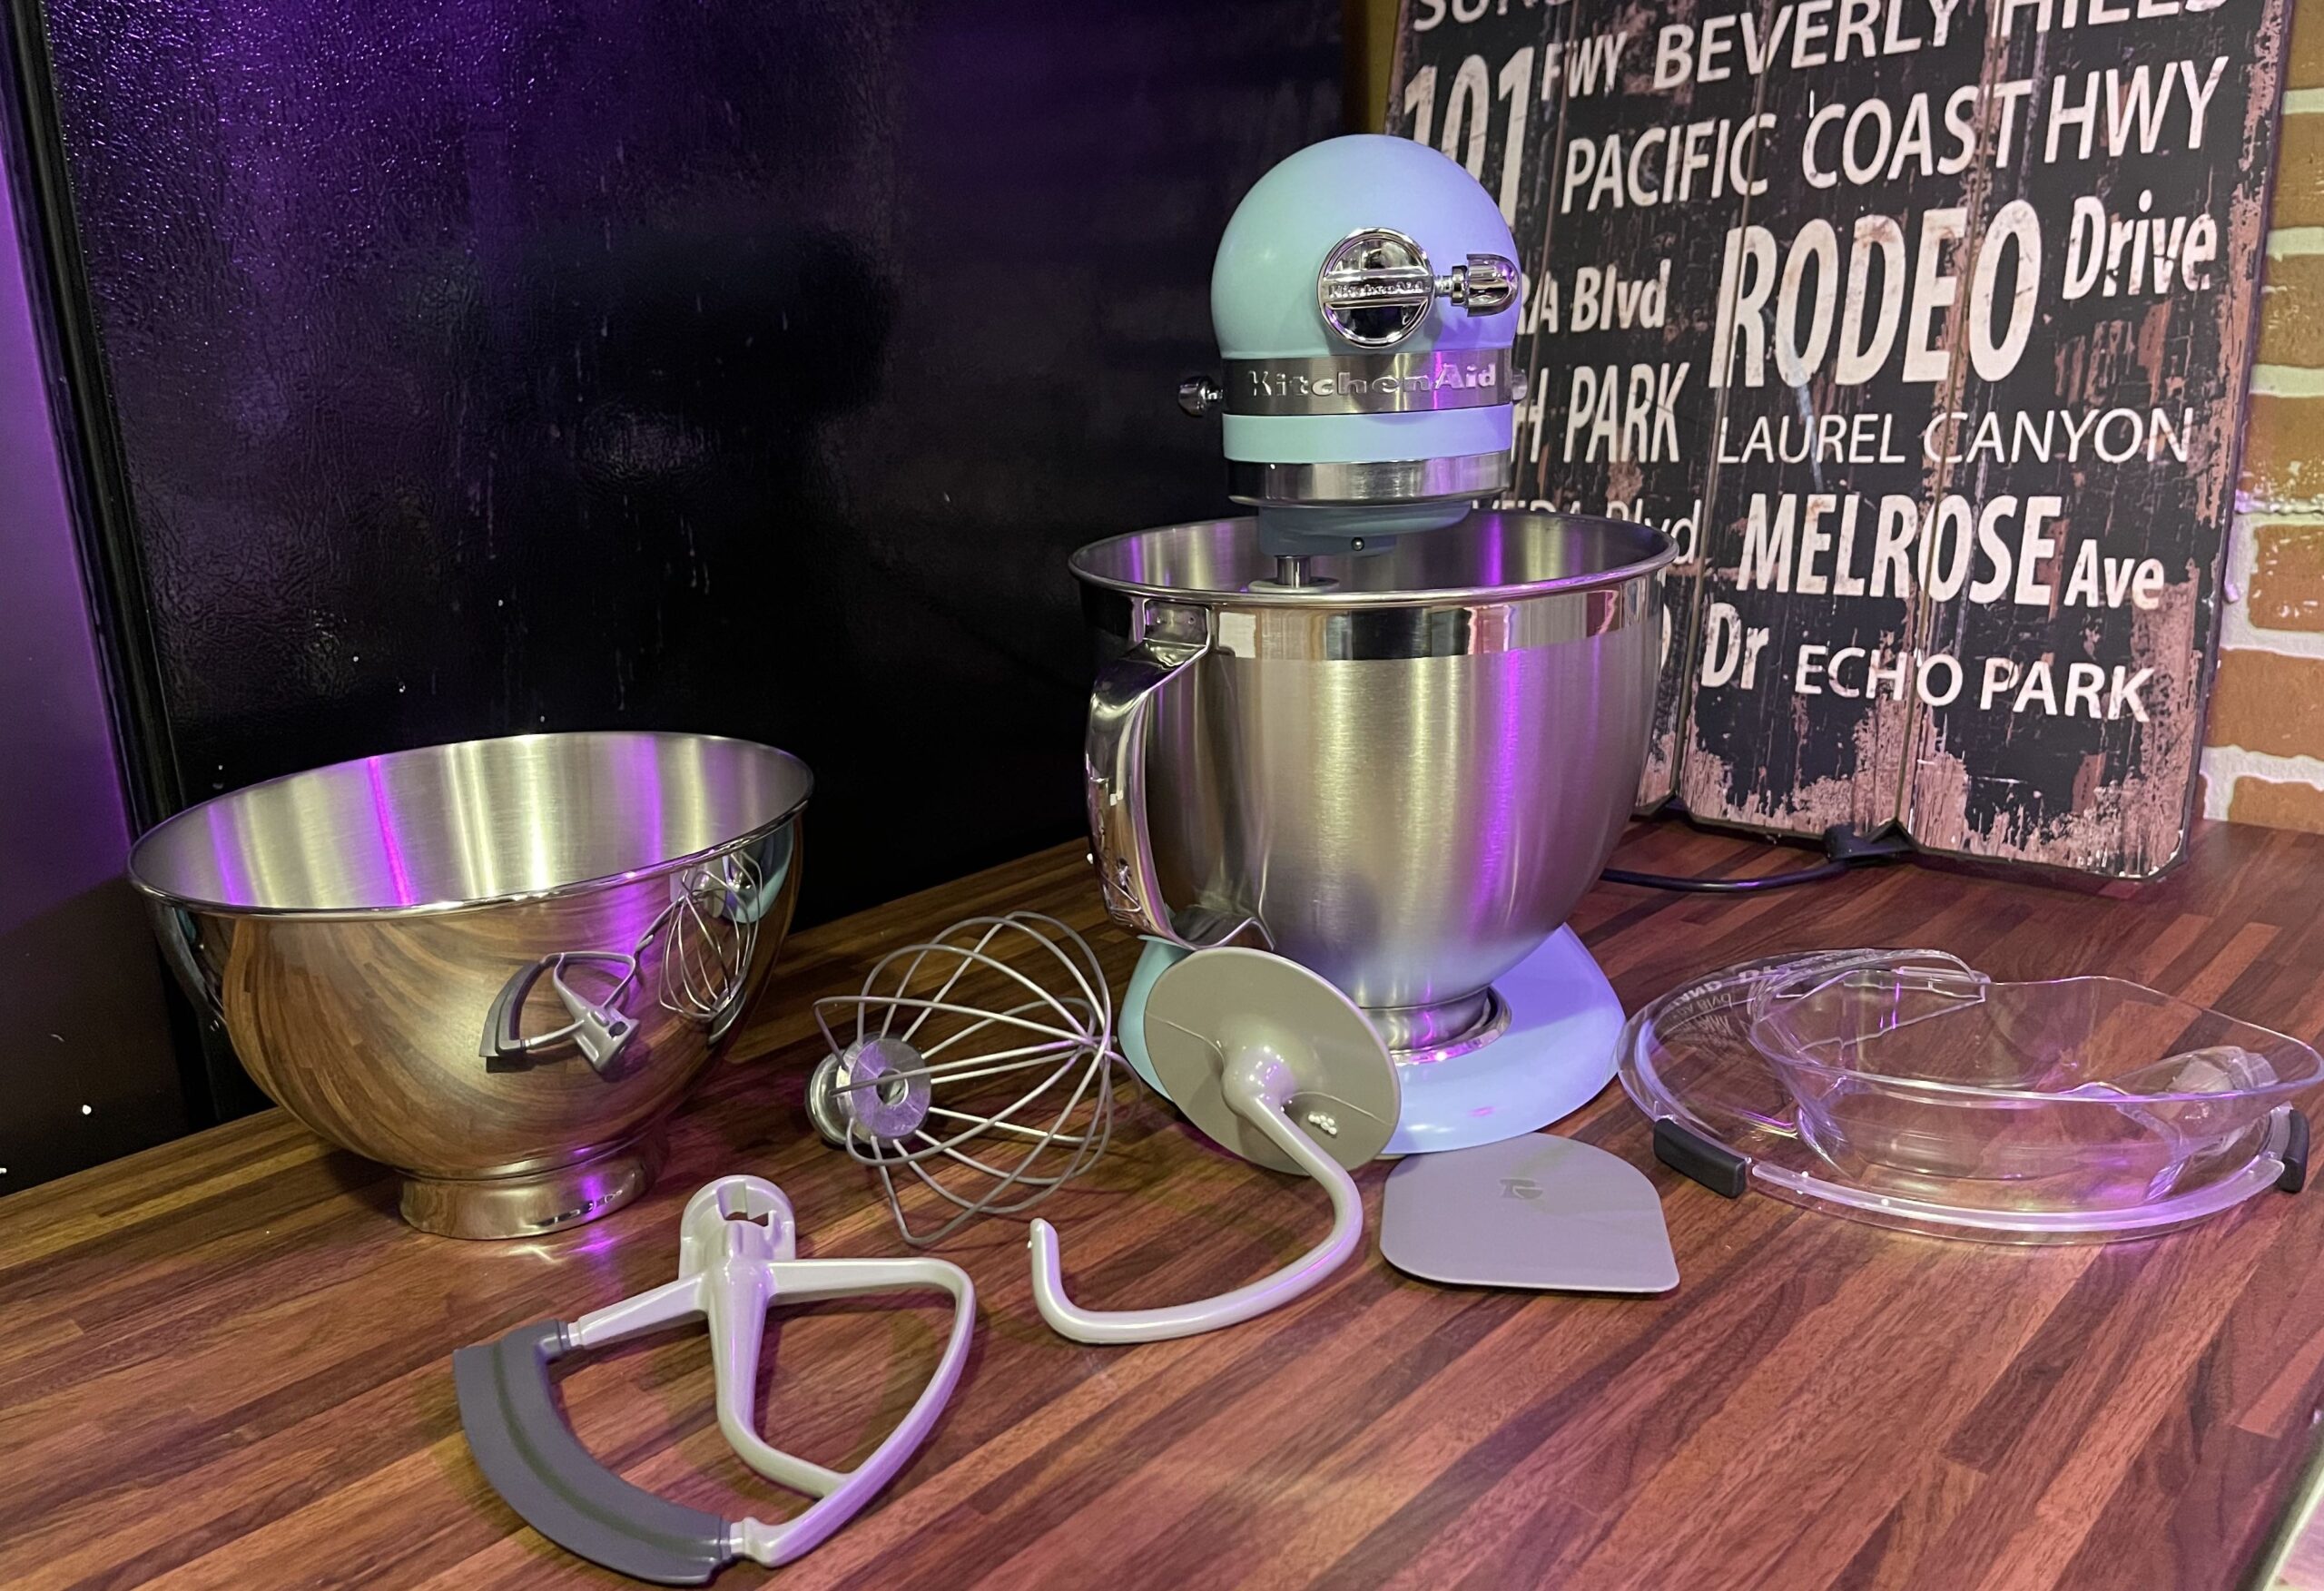 Do the hand mixers count too? Until my budget allows for the beautiful stand  mixer I covet, I'll continue using my amazing kitchen aid hand mixer! I  have had this for going